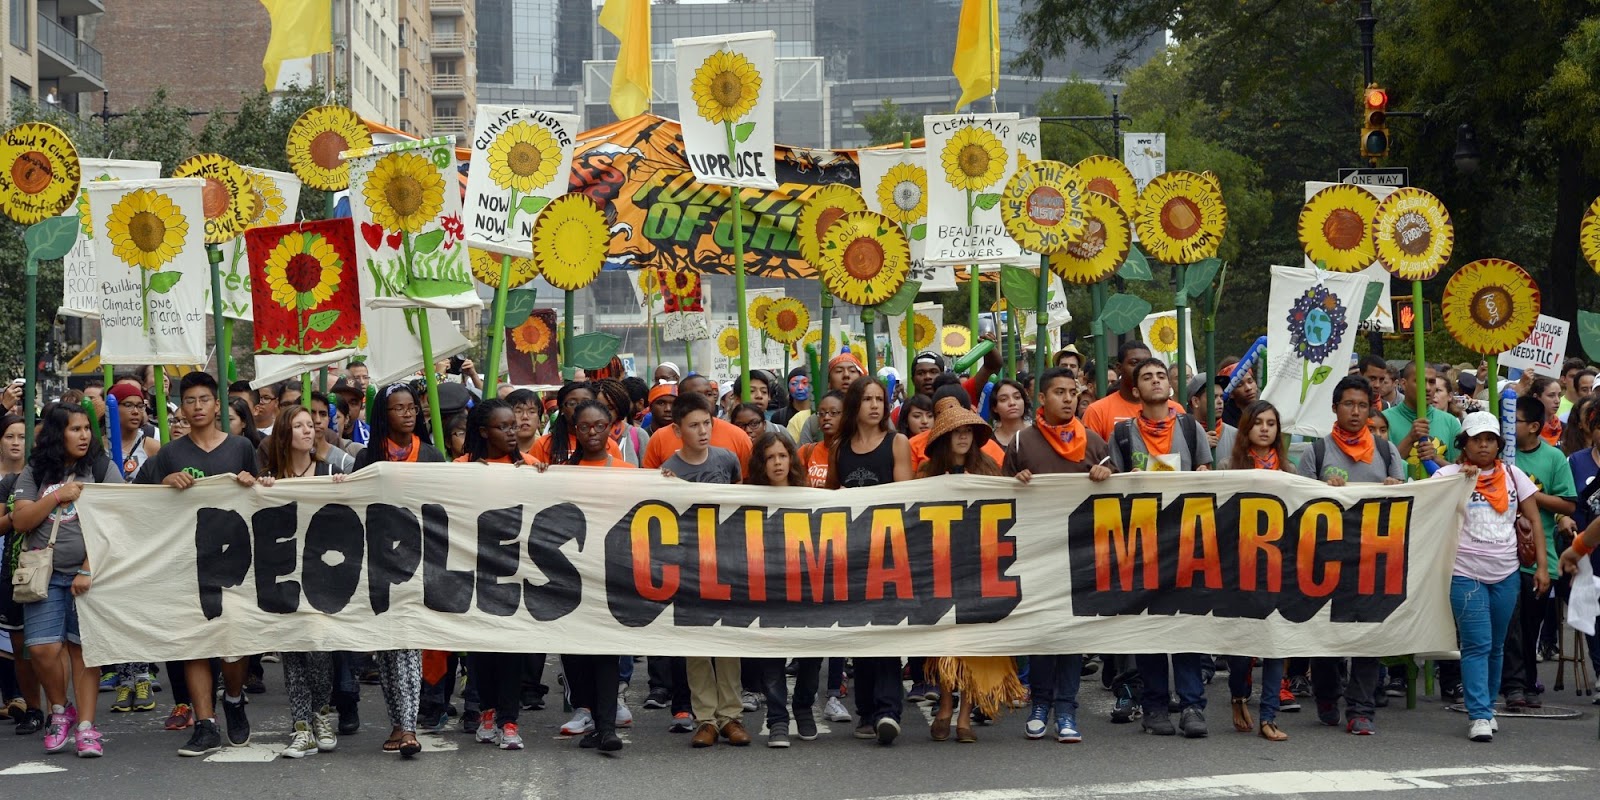 People's Climate March, NYC, September 21 2014.